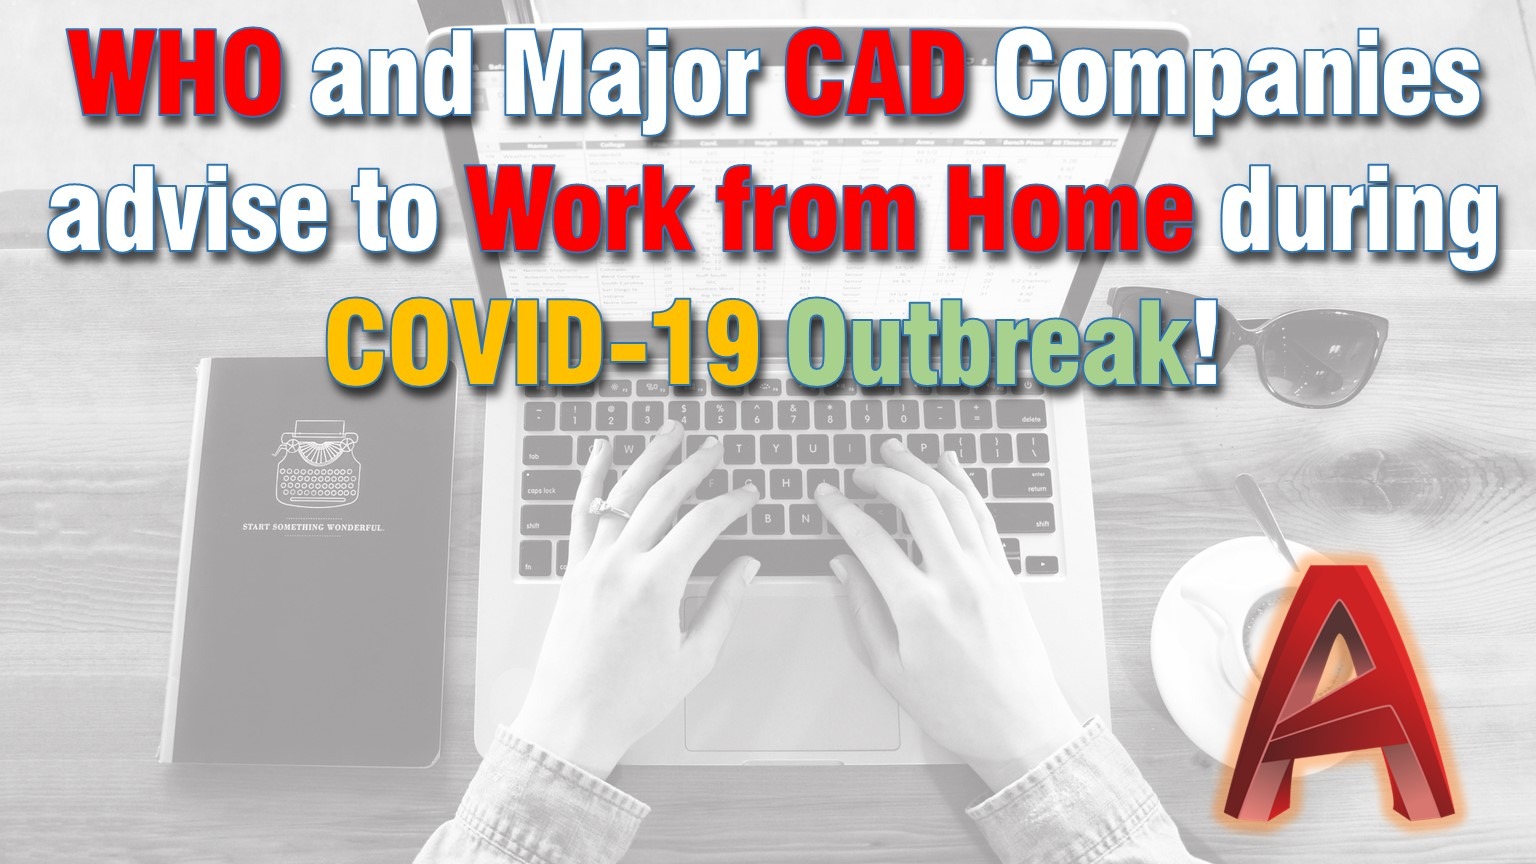 AutoCAD Work from home COVID-19